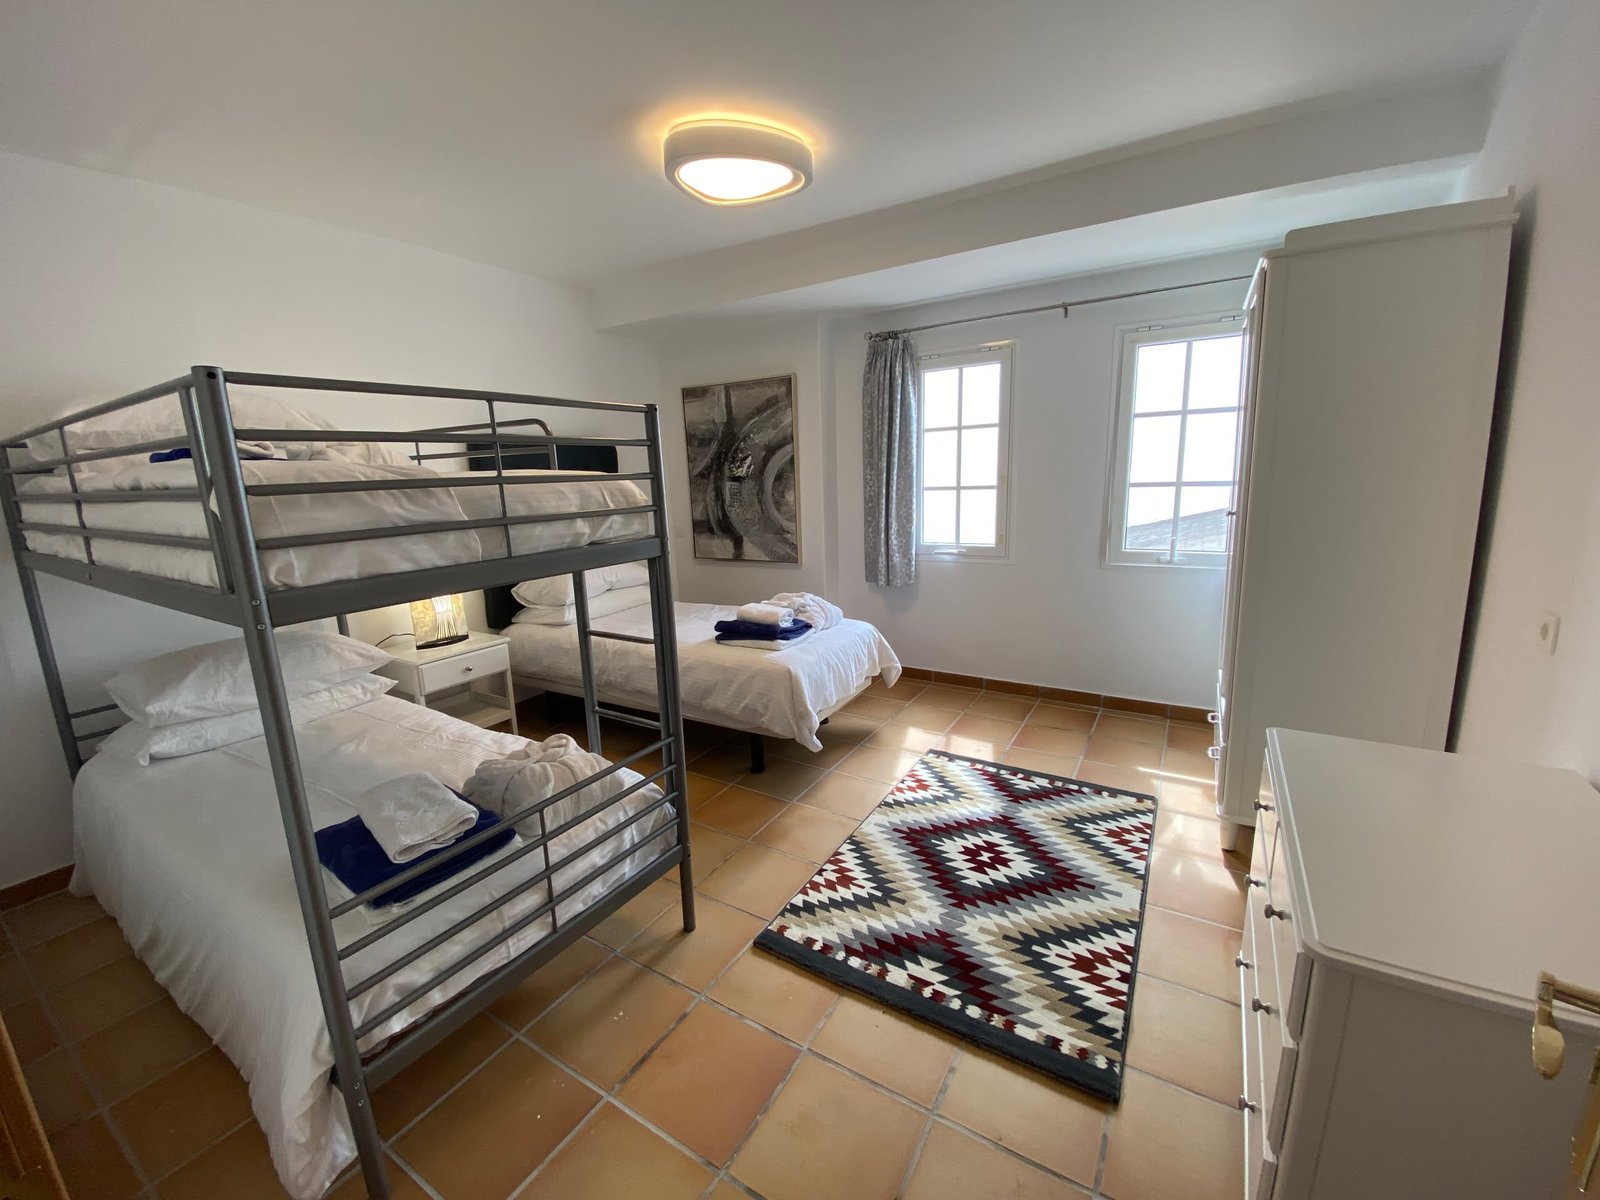 triple room - one single bed and a set of bunk beds